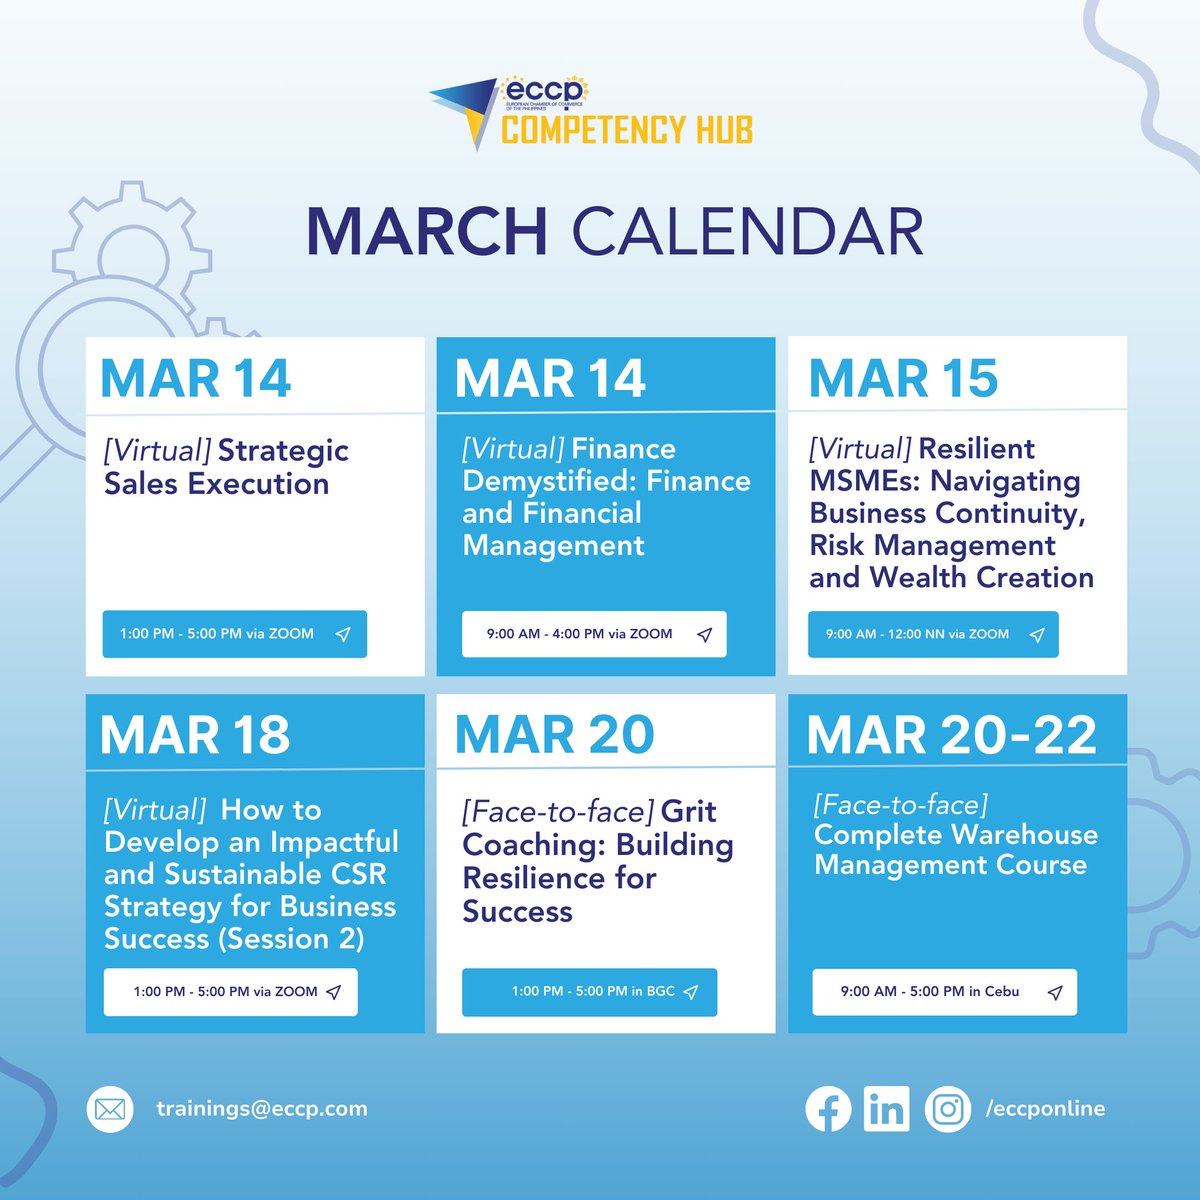 Our March lineup is designed to provide companies with the extra boost they need to keep their employees motivated and ready to achieve their quarterly work and career goals!

#ECCPCompetencyHub
#BrighterPossibilities
#TrainingsPH #Upskill #Workshops